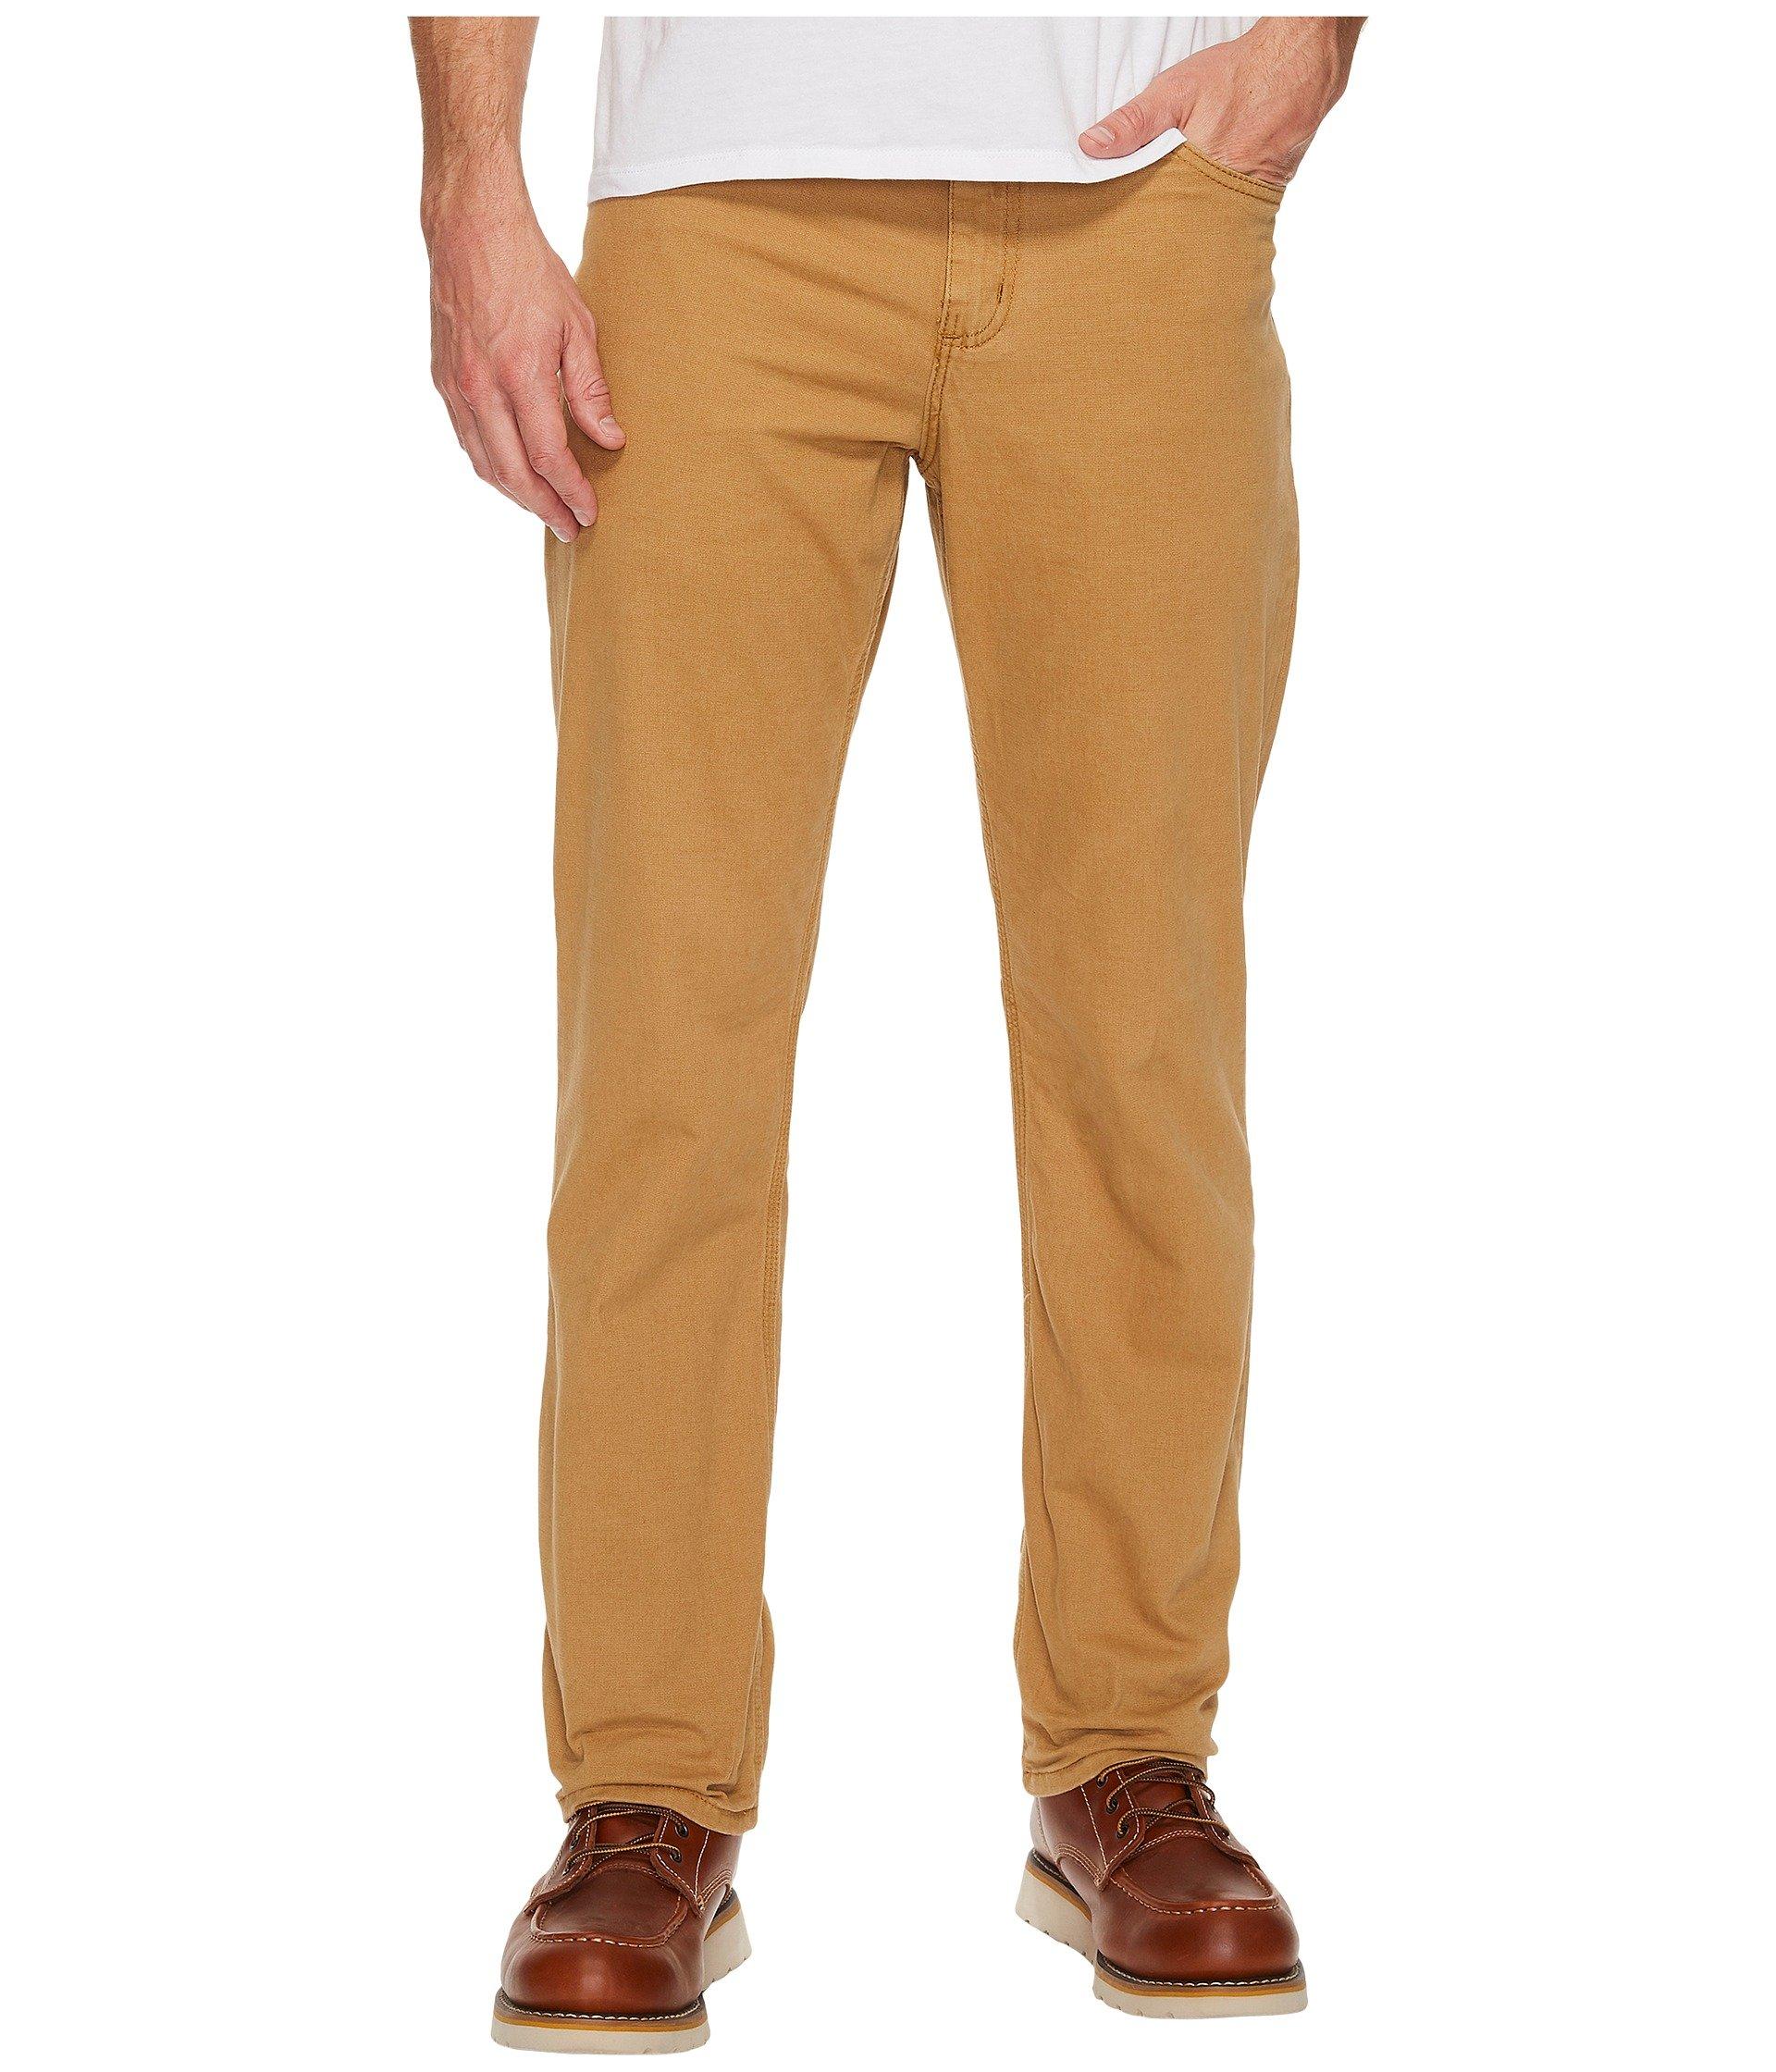 Carhartt Cotton Five-pocket Relaxed Fit Pants in Brown for Men - Lyst